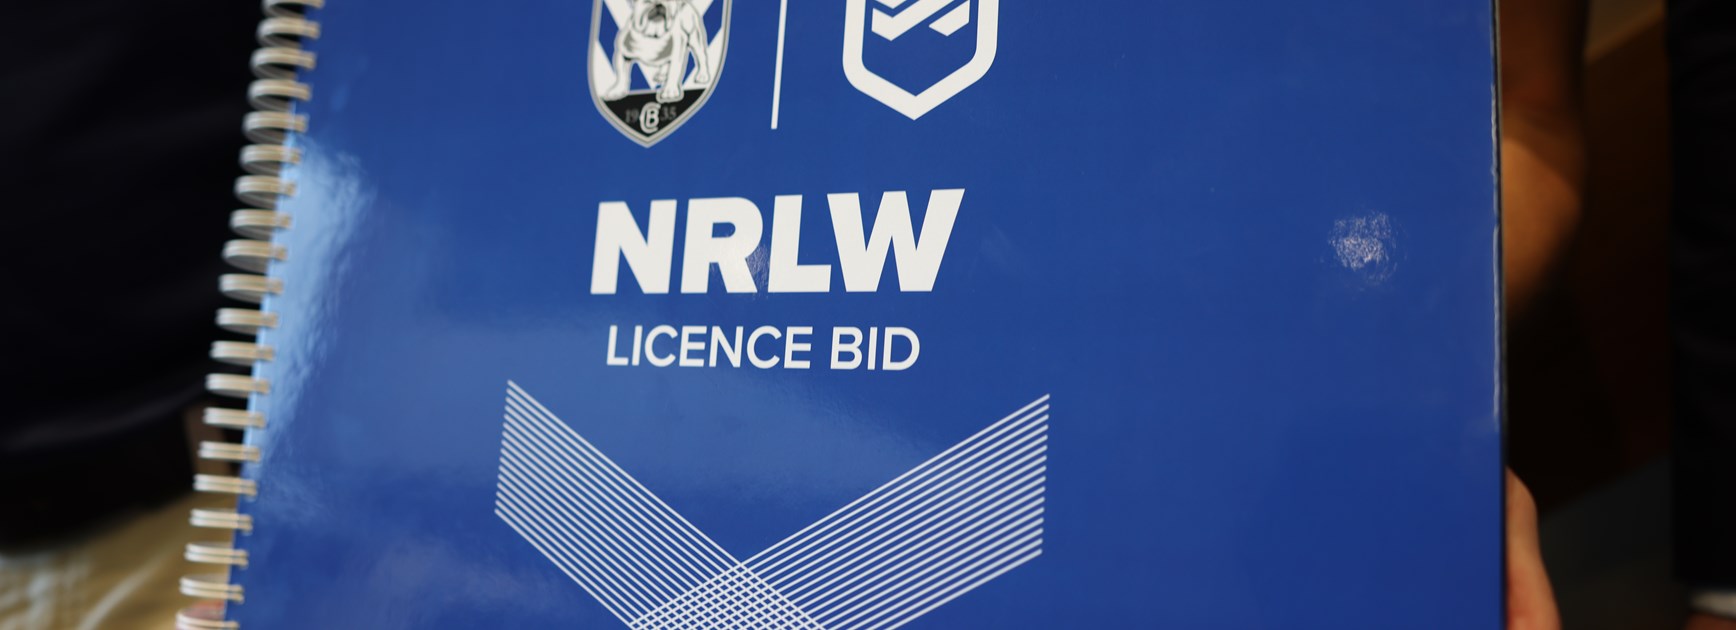 The Bulldogs have submitted an application to the NRLW